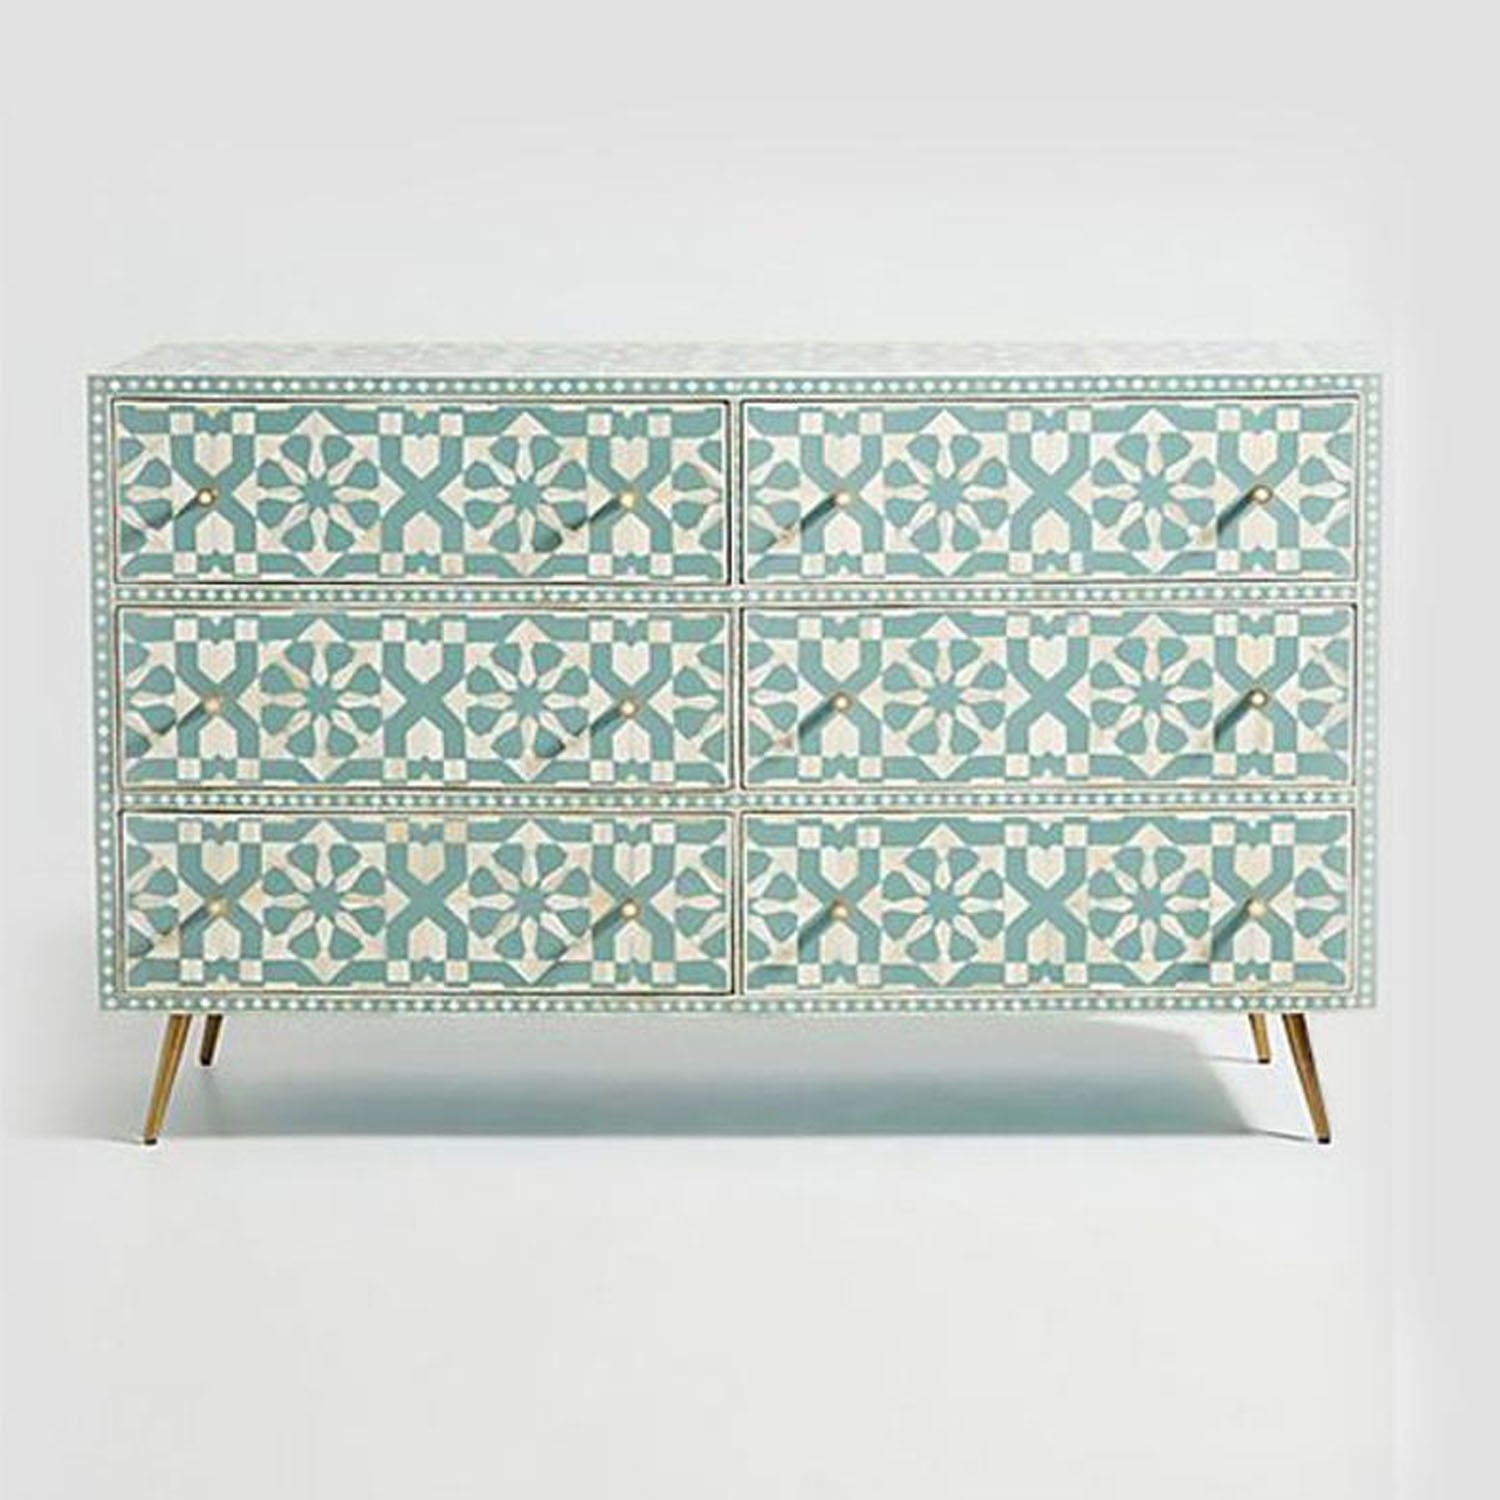 Bone Inlay Moroccan Design 6 Drawers Chest of Drawers Green, Bone Inlay Moroccan Design 6 Drawers Dresser Table, Storage Unit - Notbrand